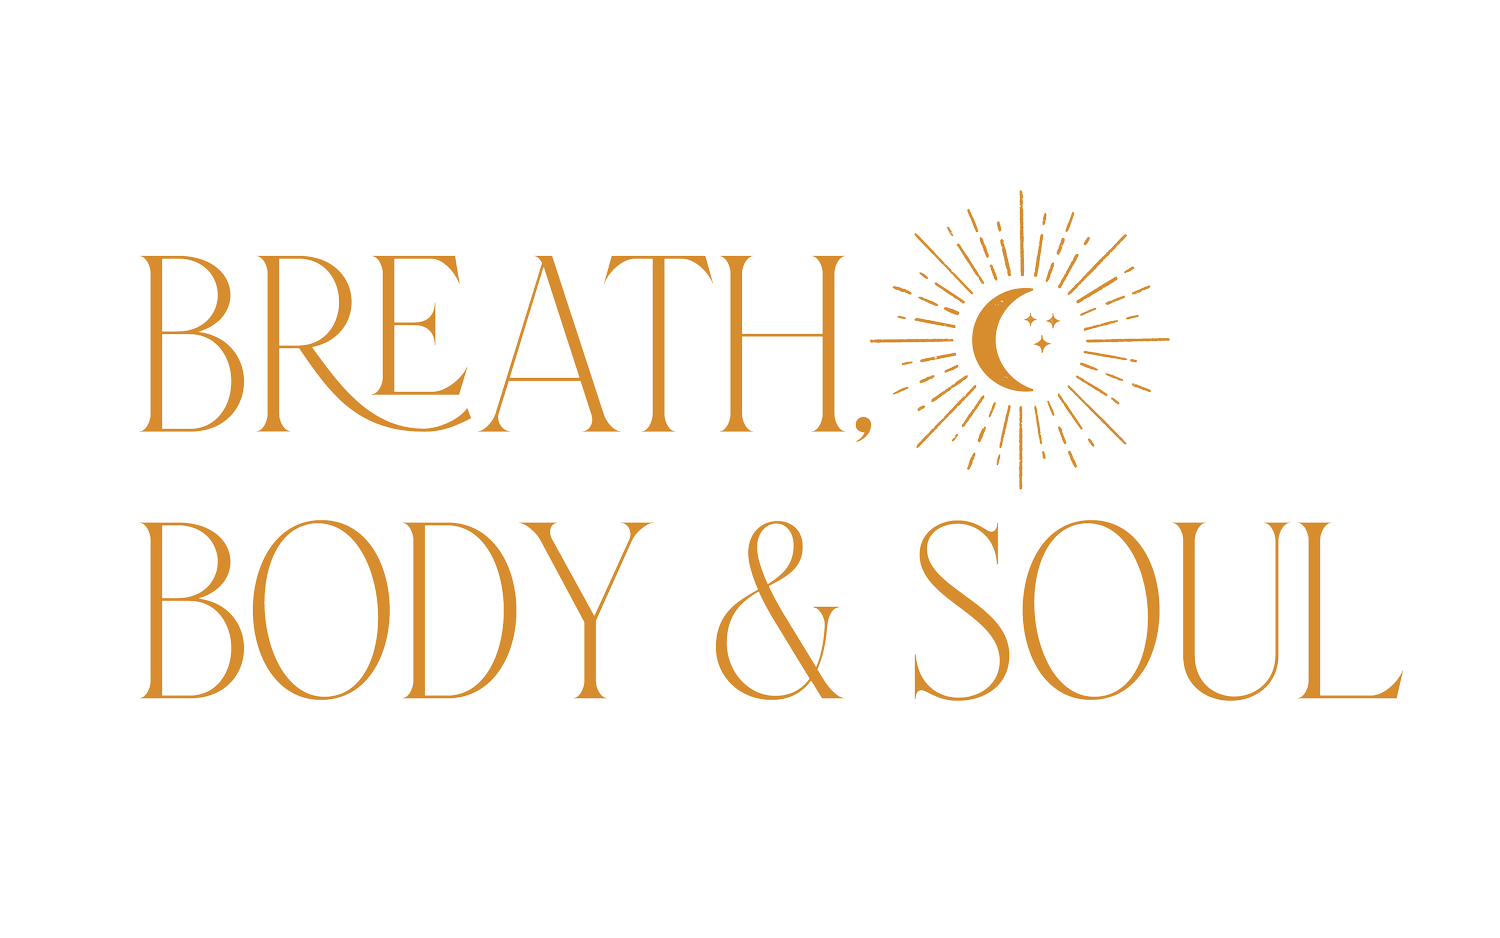 Breath, Body, and Soul